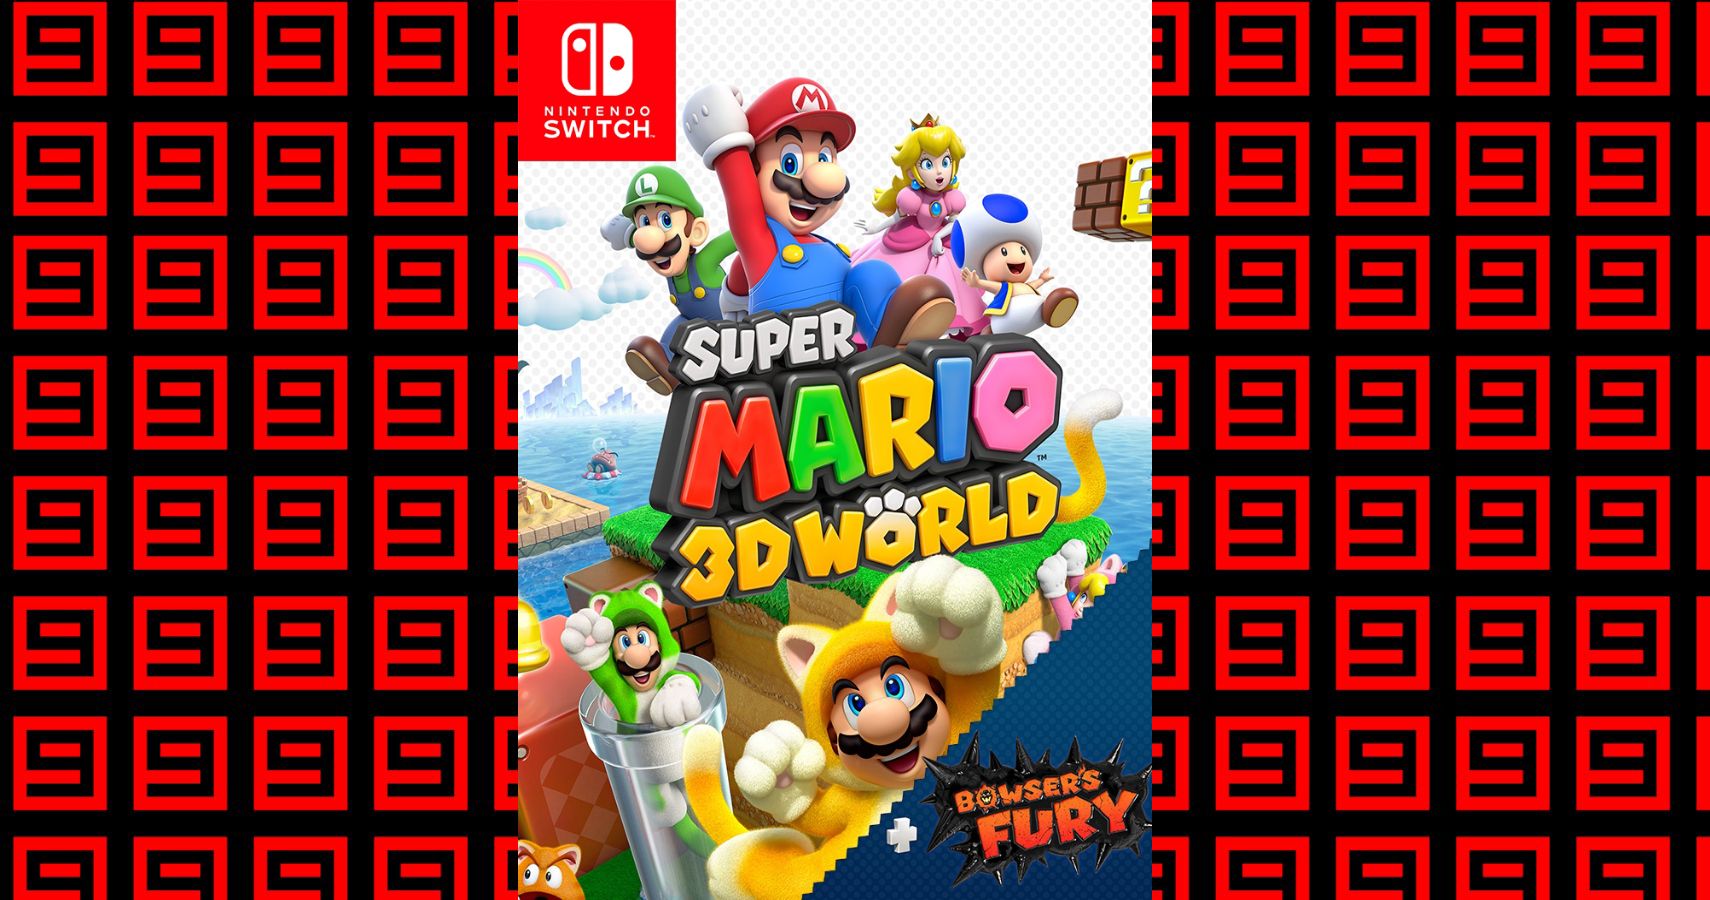 3d world switch release date